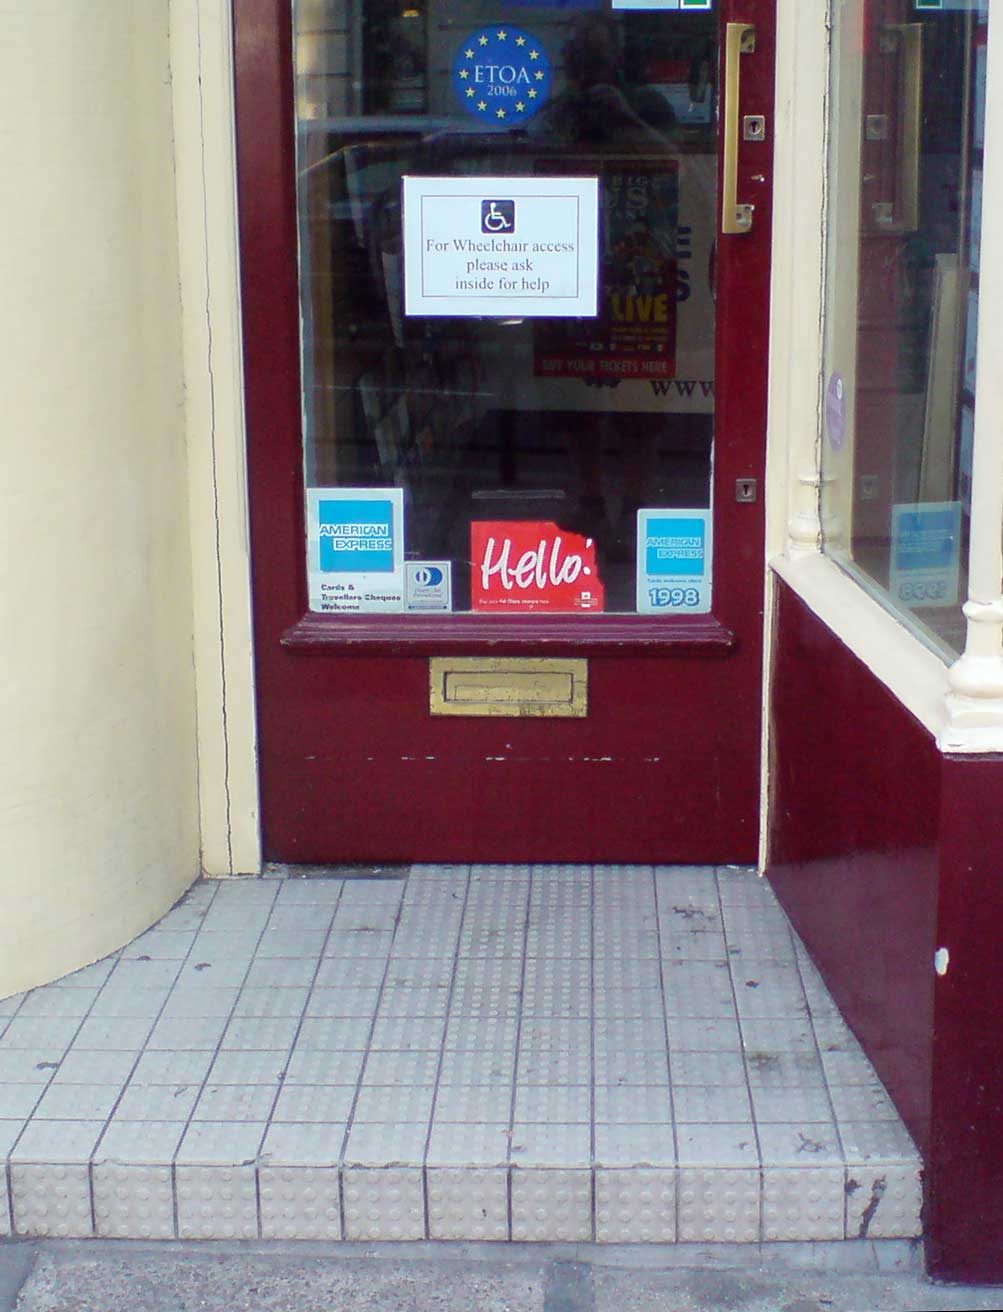 Door with a sign, “For Wheelchair access please ask inside for help.” In front of the door is a roughly 4-inch high step. Image by Darren Foreman.